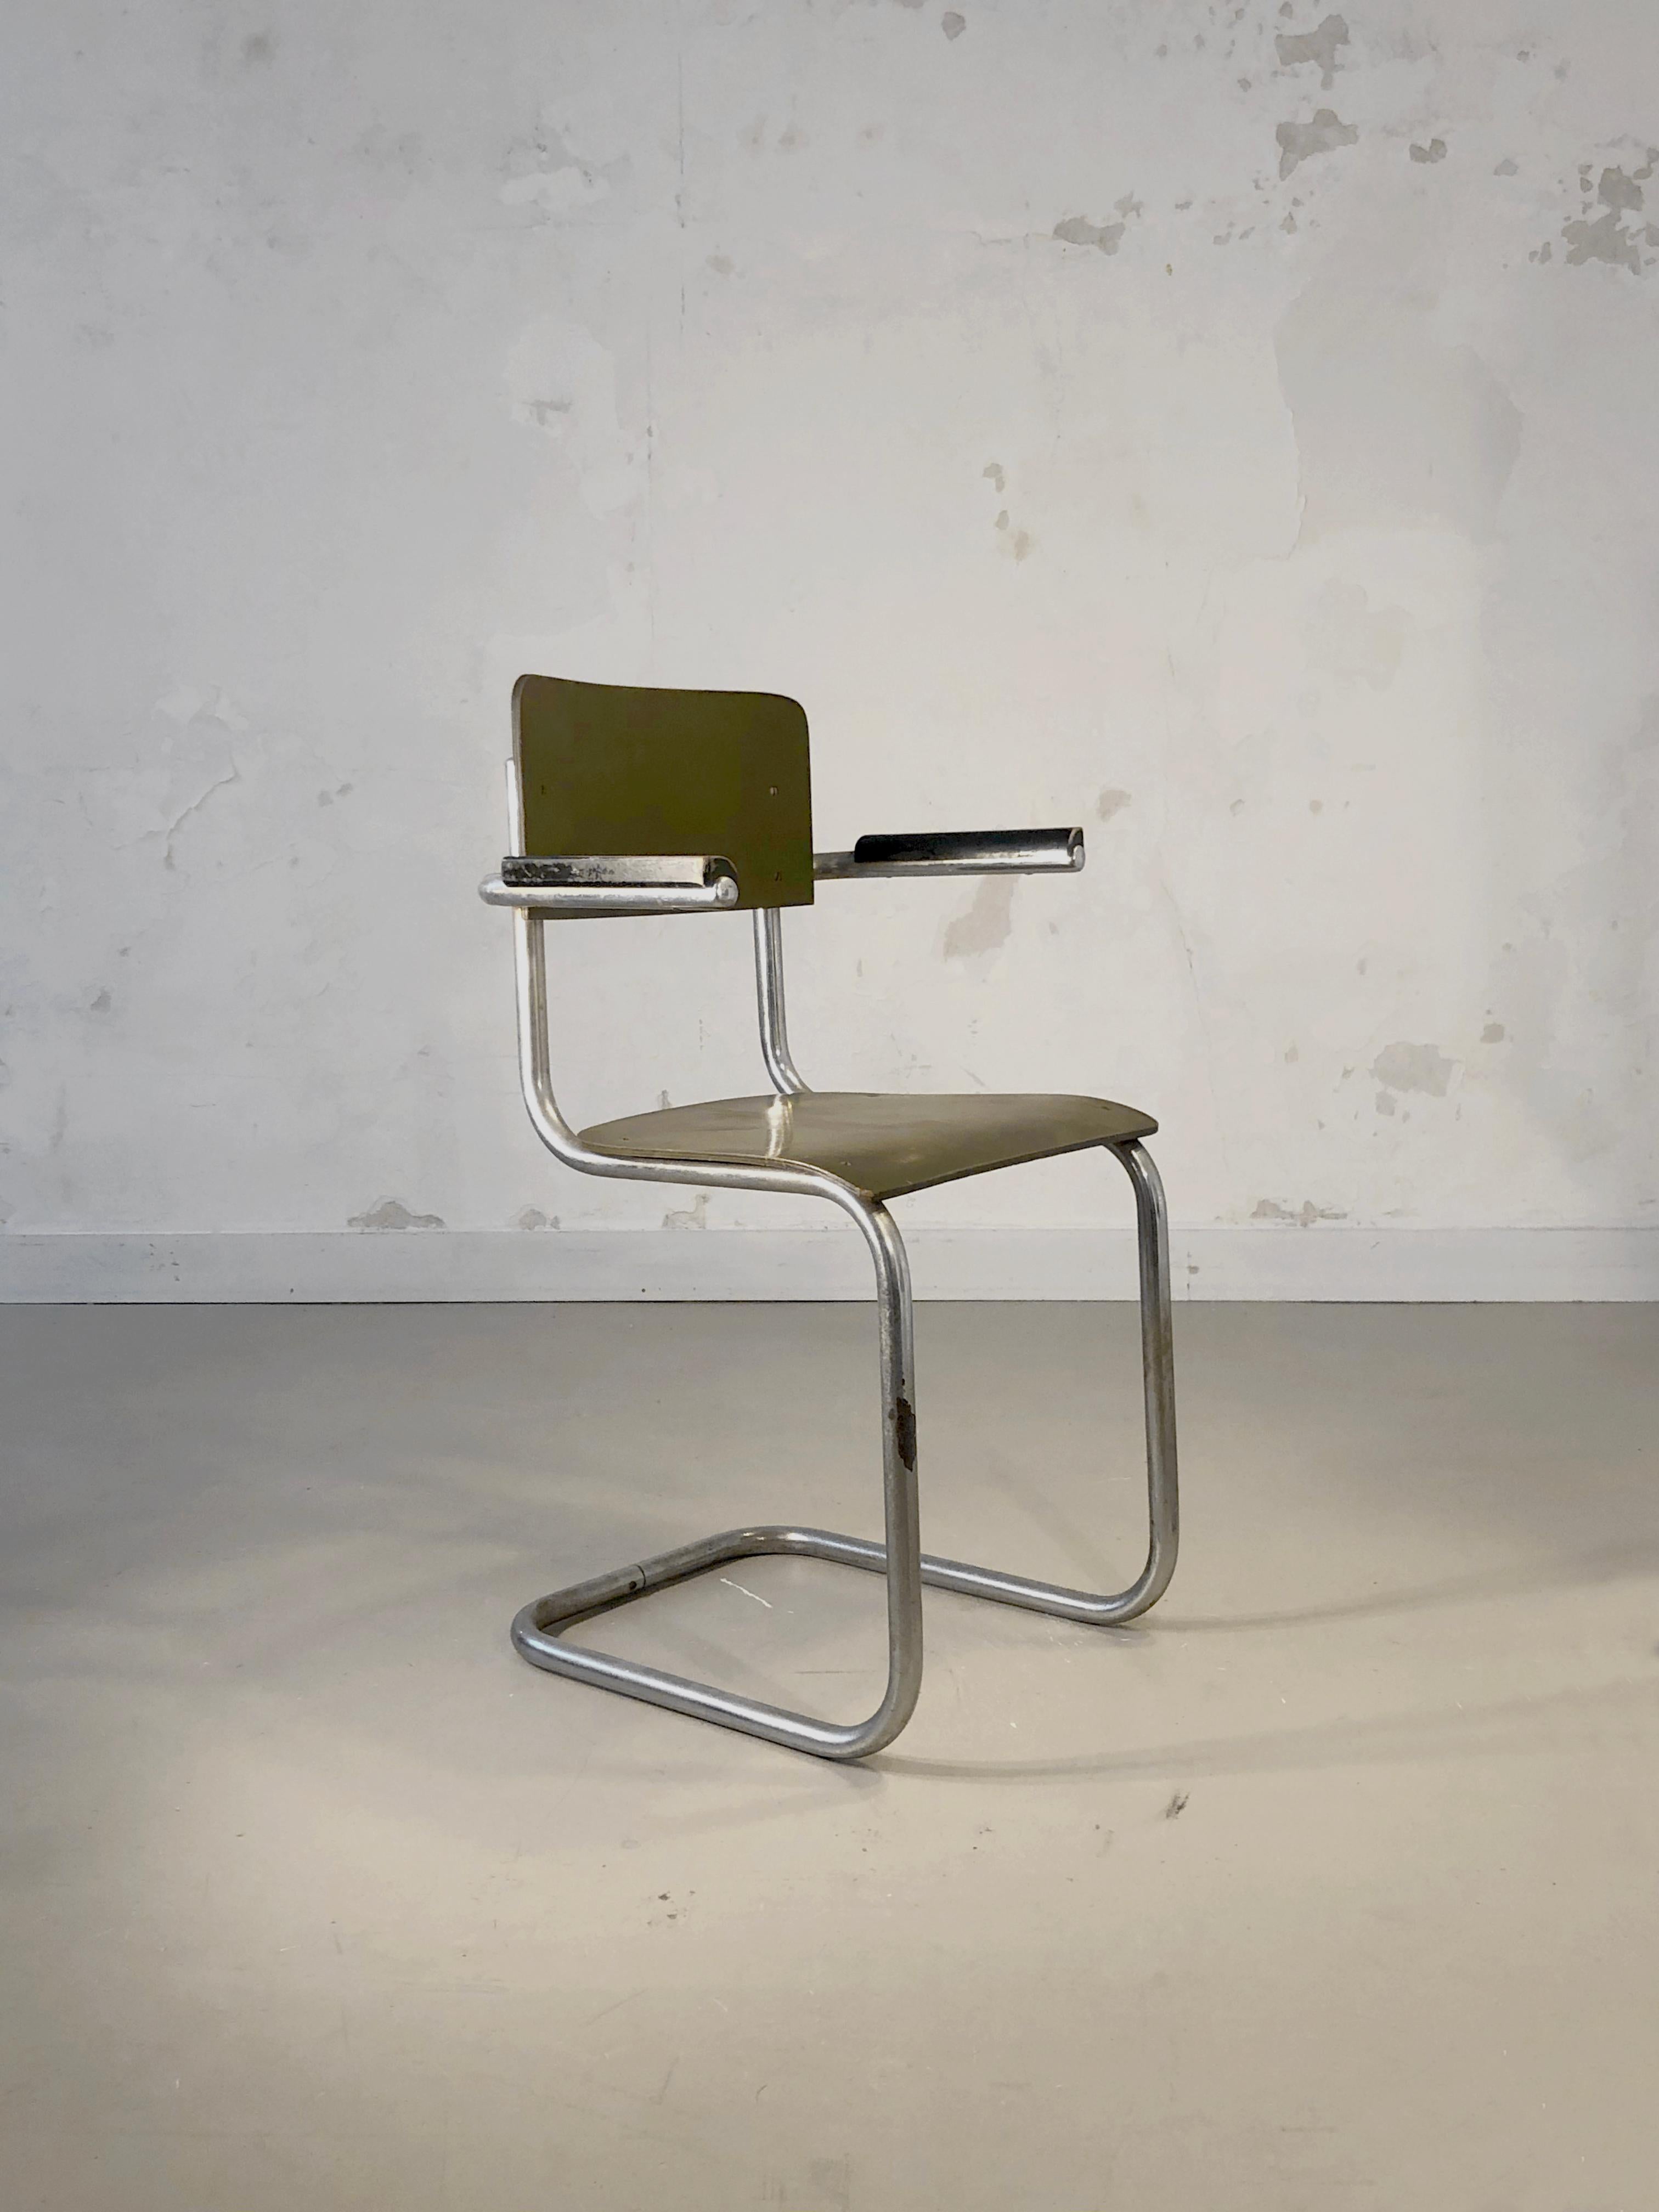 An Early MODERNIST BAUHAUS CHAIR by MART STAM for MAUSER WERKE, Germany 1930 For Sale 5